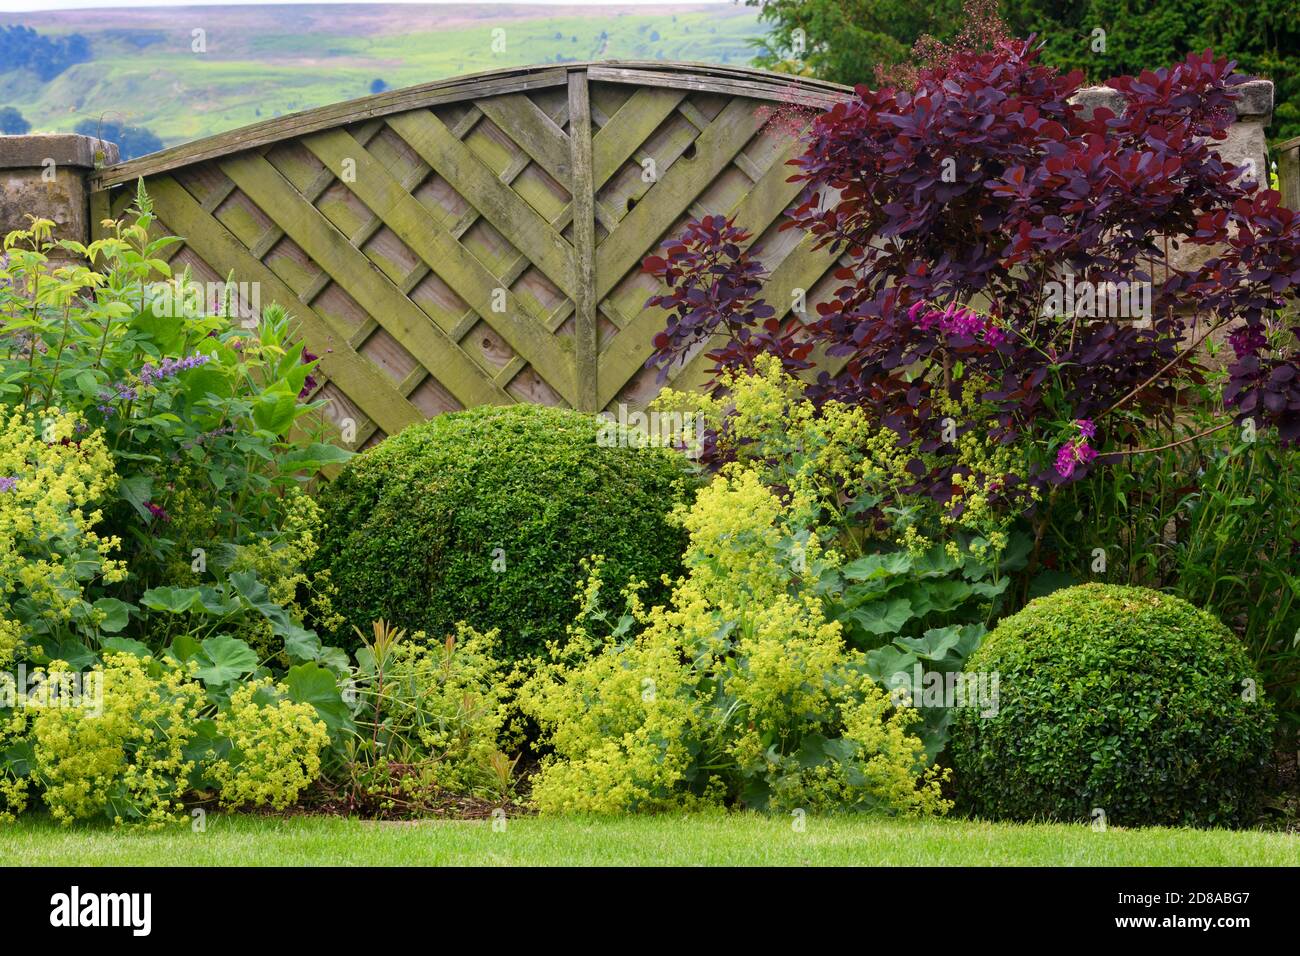 Landscaped private garden close-up (cottage design, summer flowers, mixed border plants, shrubs, colourful foliage, fencing) - Yorkshire, England, UK. Stock Photo